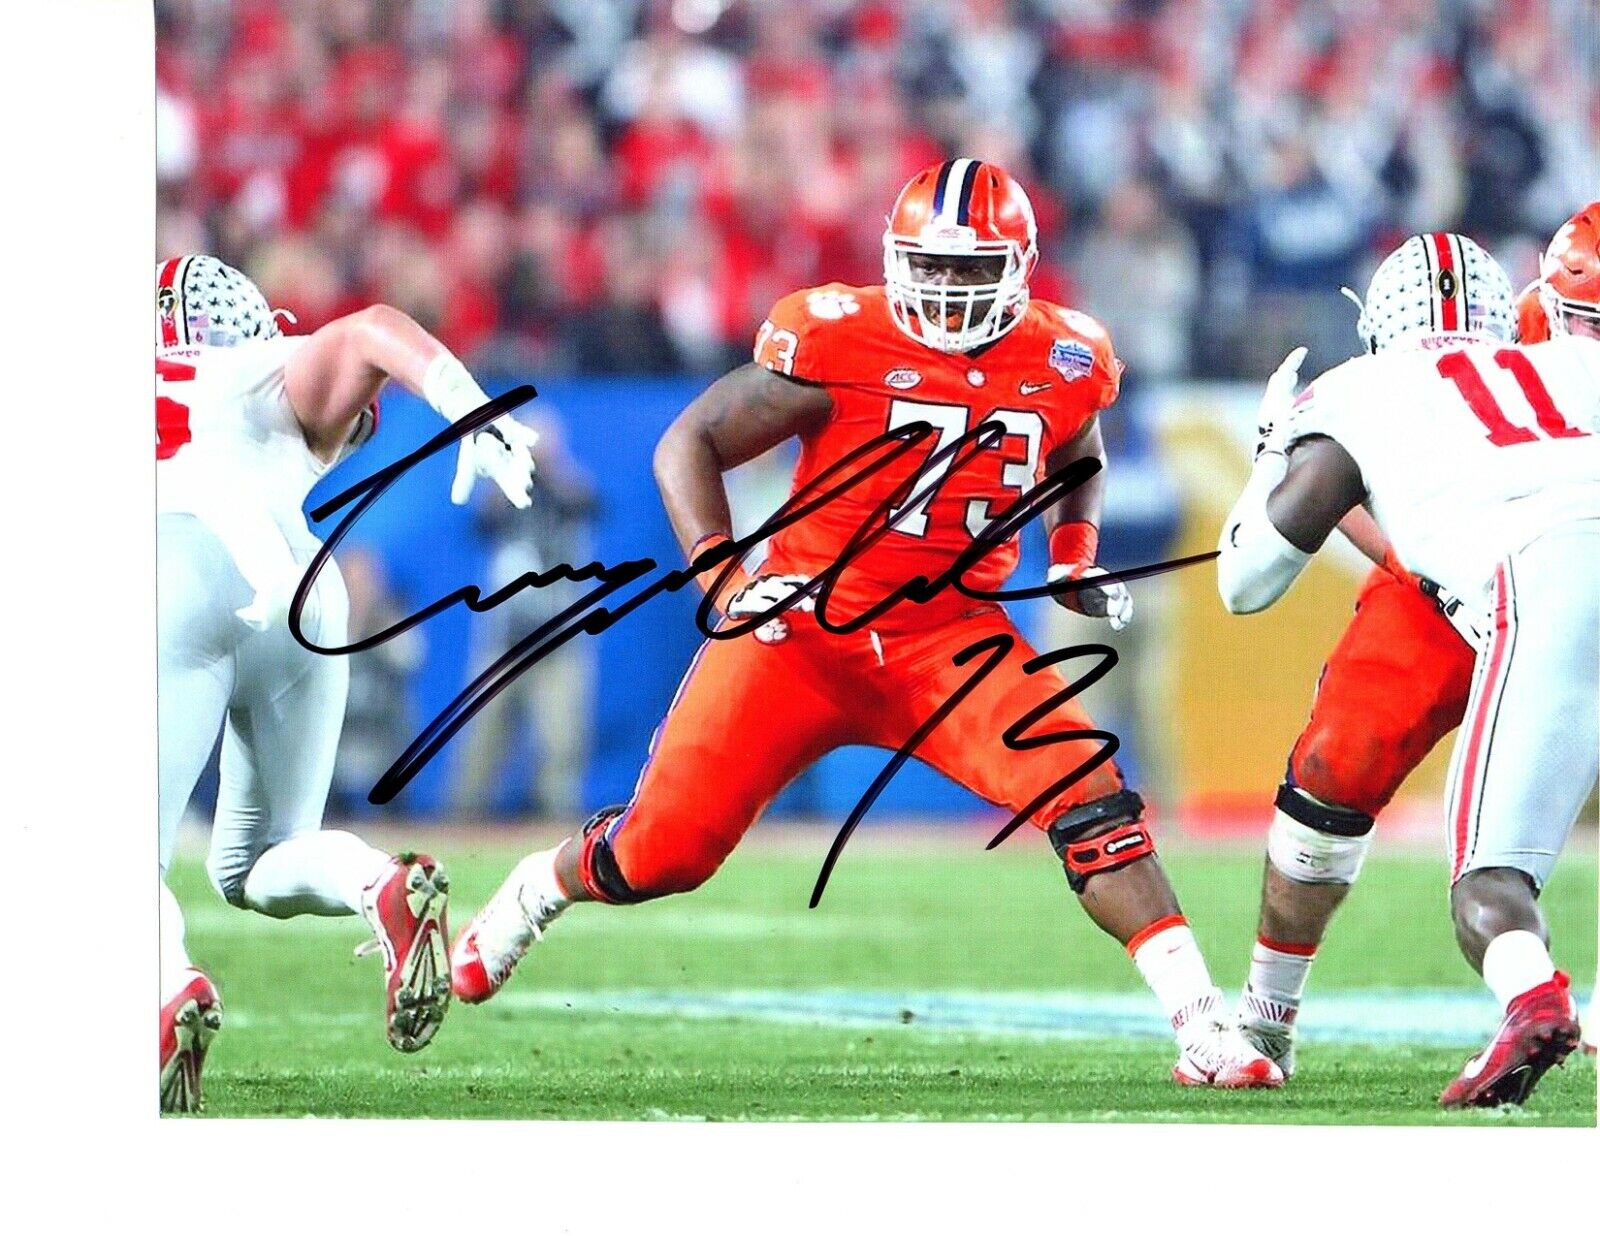 Tremayne Anchrum Jr. Clemson Tigers signed autographed 8x10 football Photo Poster painting d